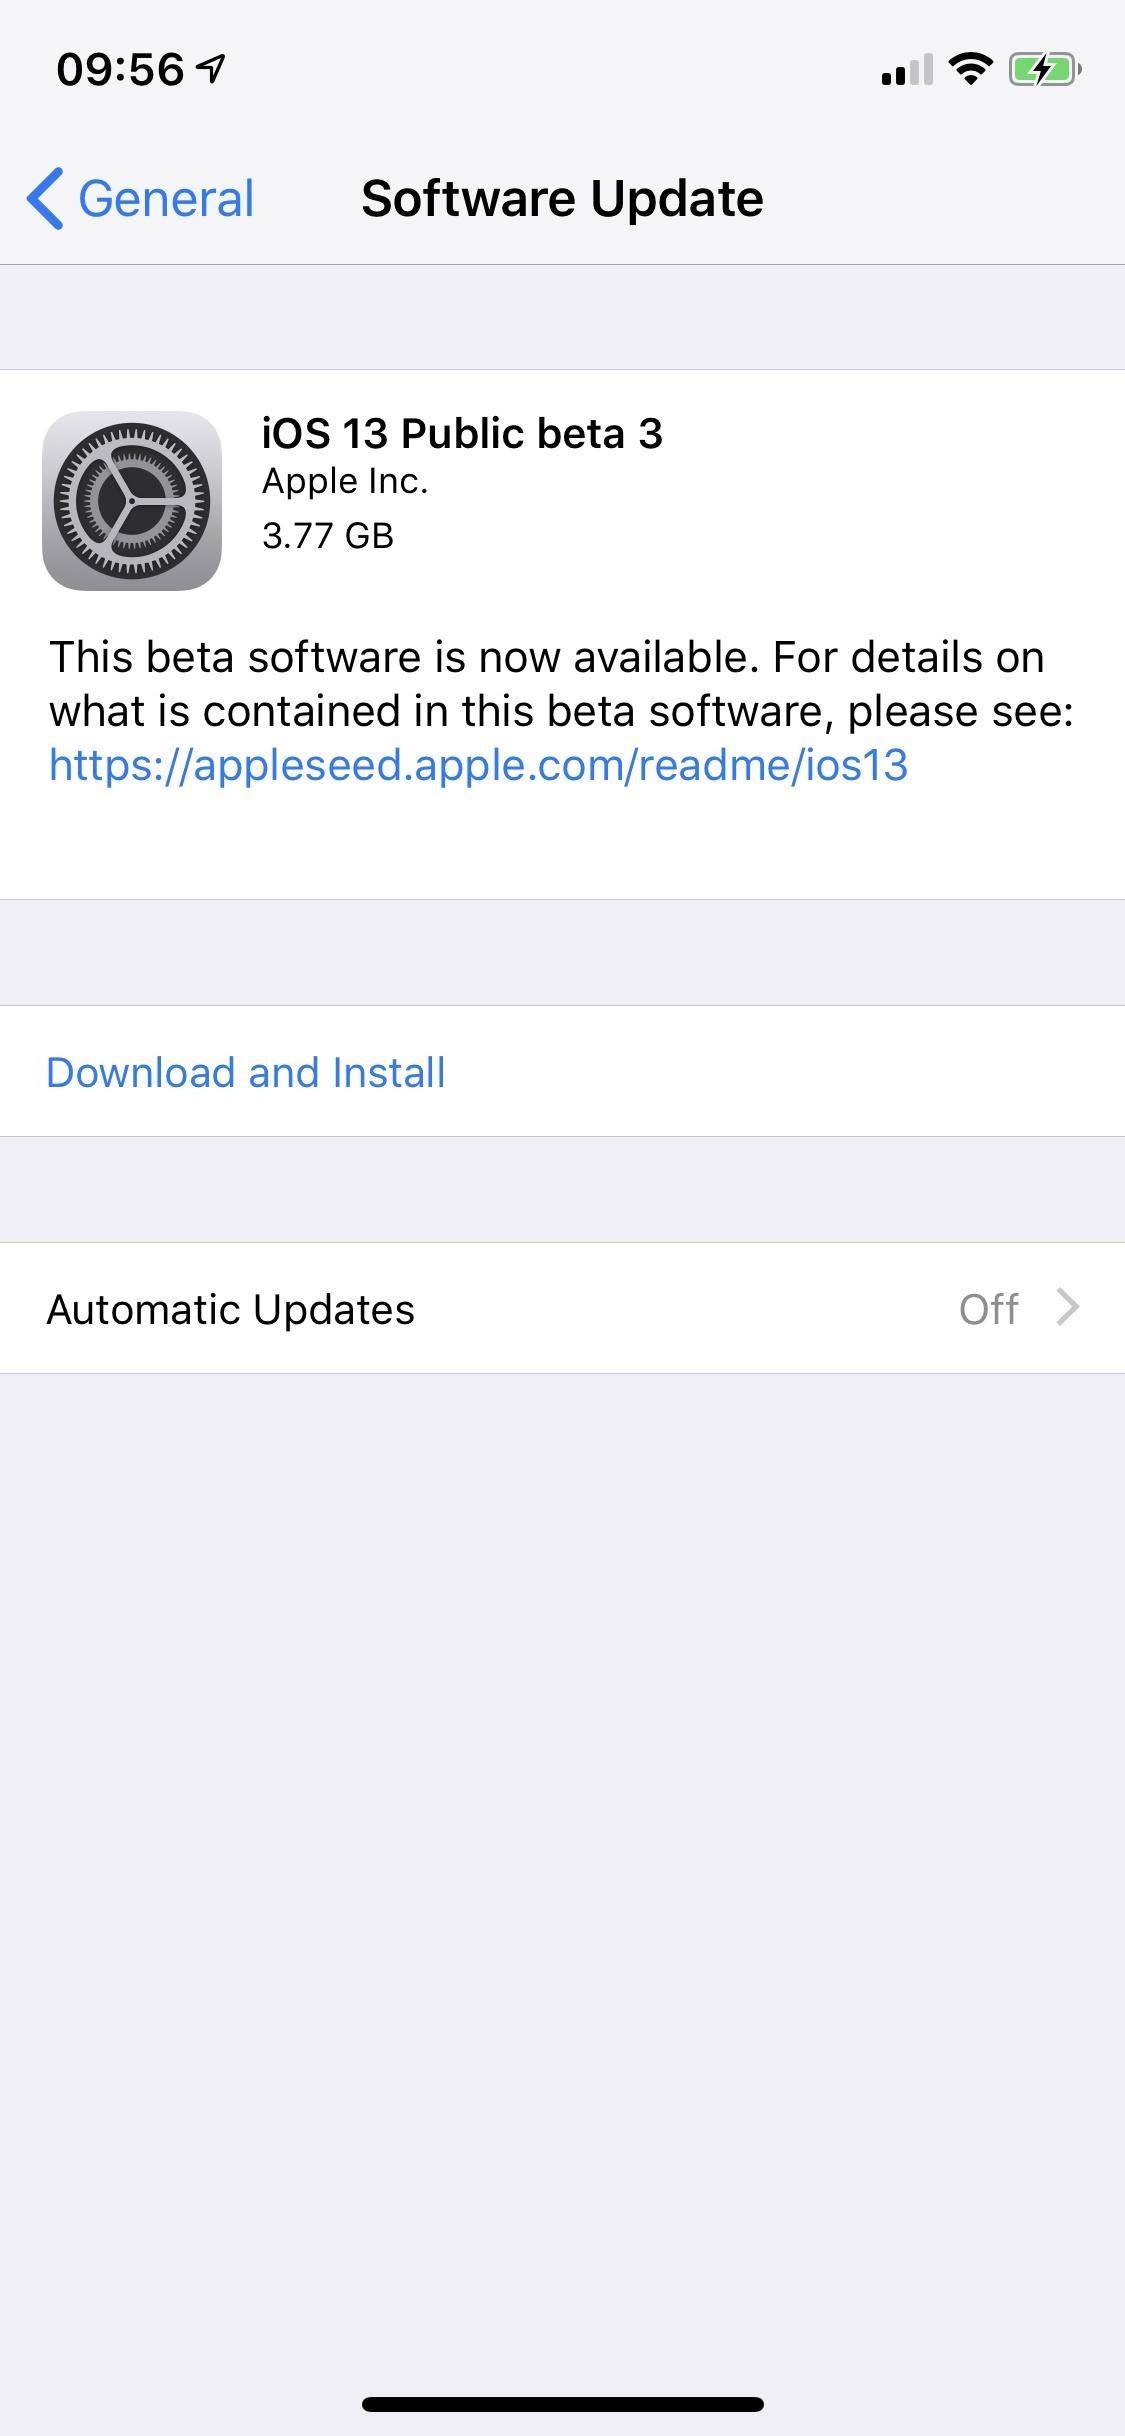 Apple iOS 13 Public Beta 3 Available, Includes Updates to 3D Touch, Photos, Icons & More